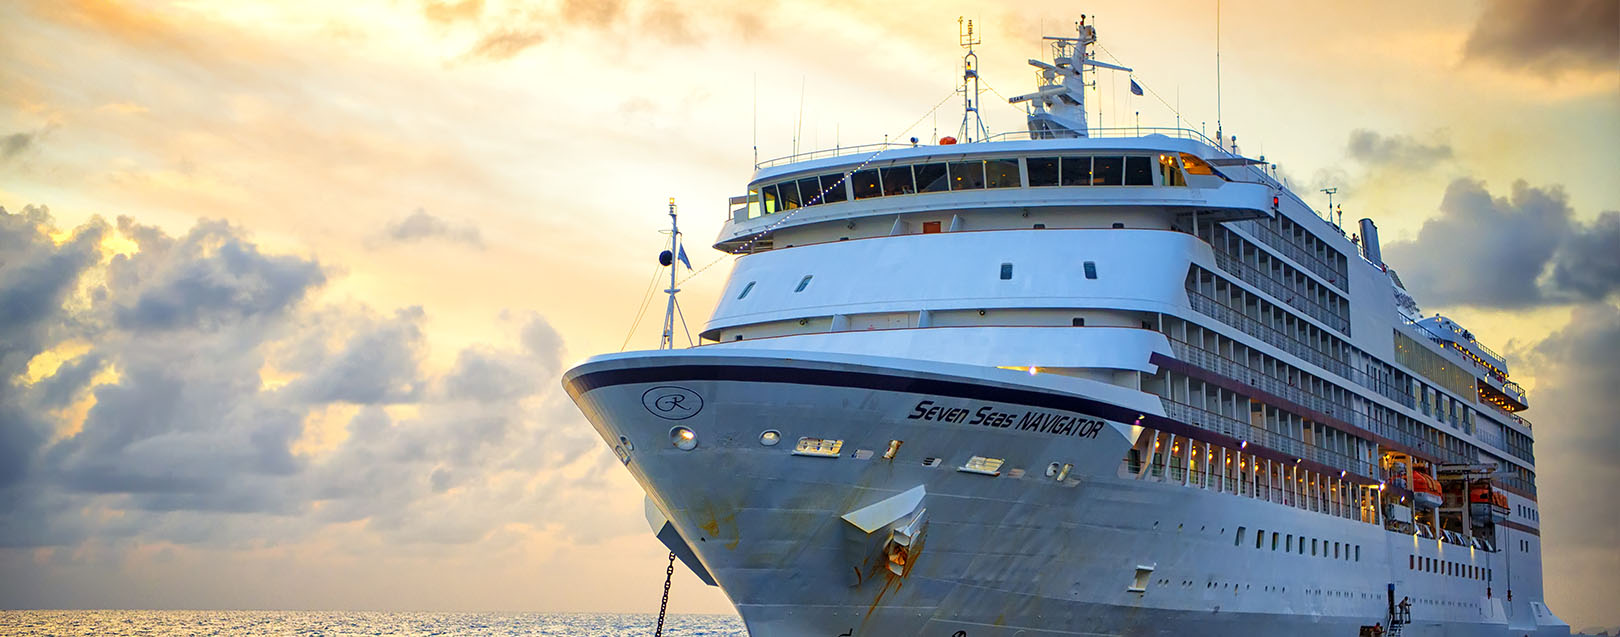 Govt to extend support to promote cruise tourism